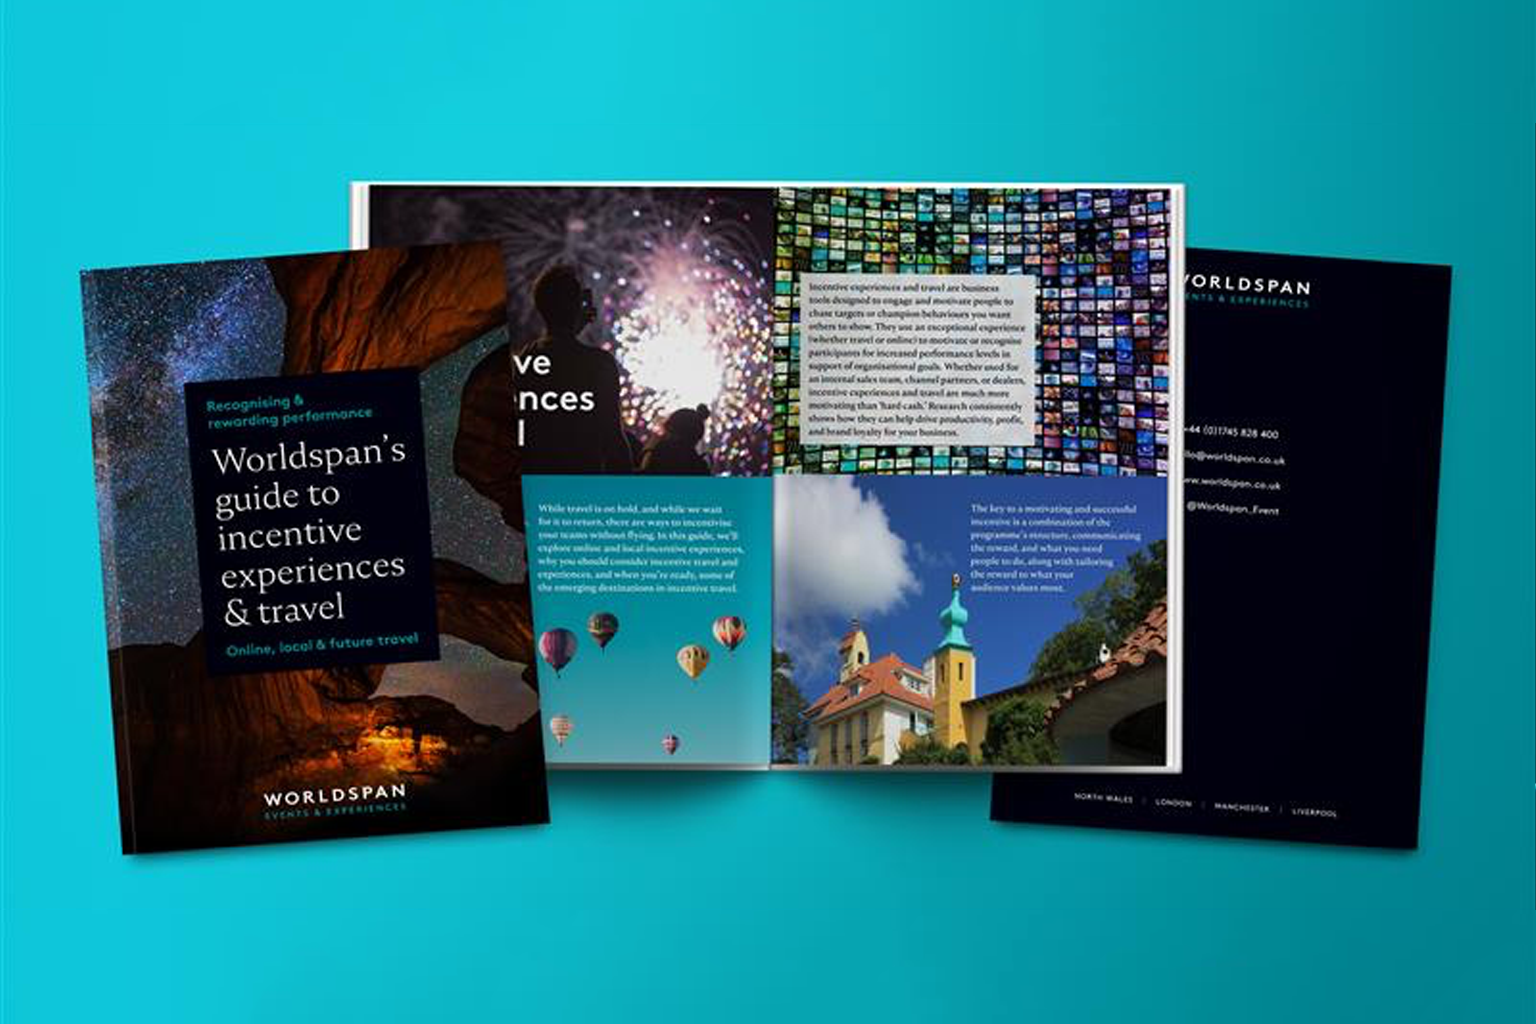 Worldspan's Guide to Incentive Experiences & Travel - online, locally and for when travel returns